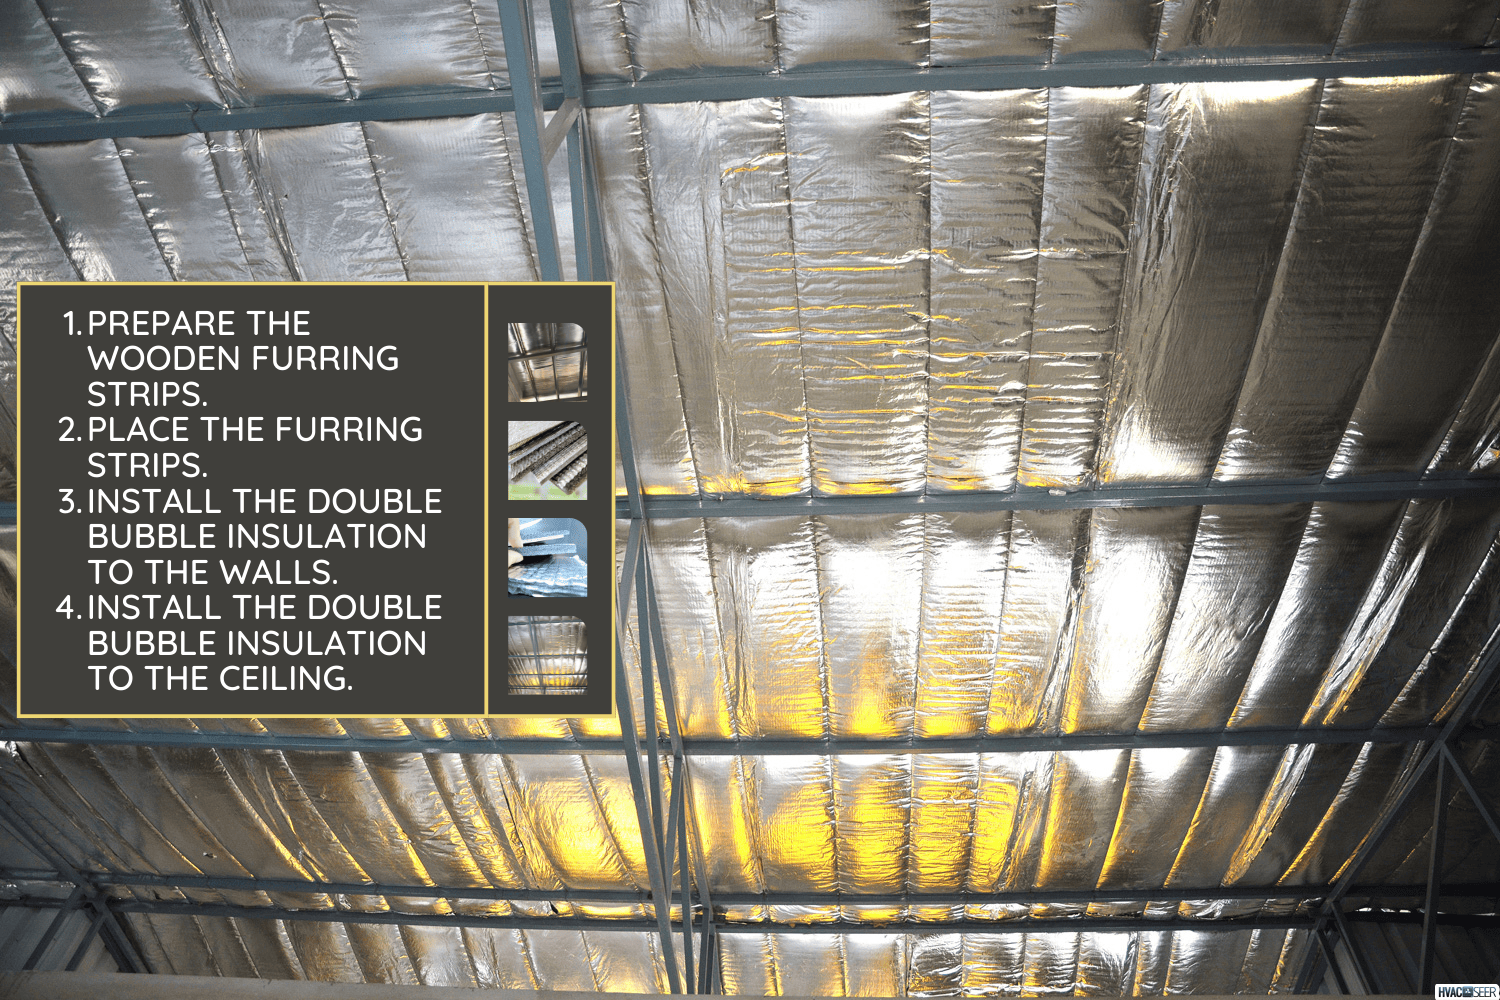 Insulation sheet placed under metal frame roof for heat protection, How To Install Double Bubble Insulation In A Metal Building